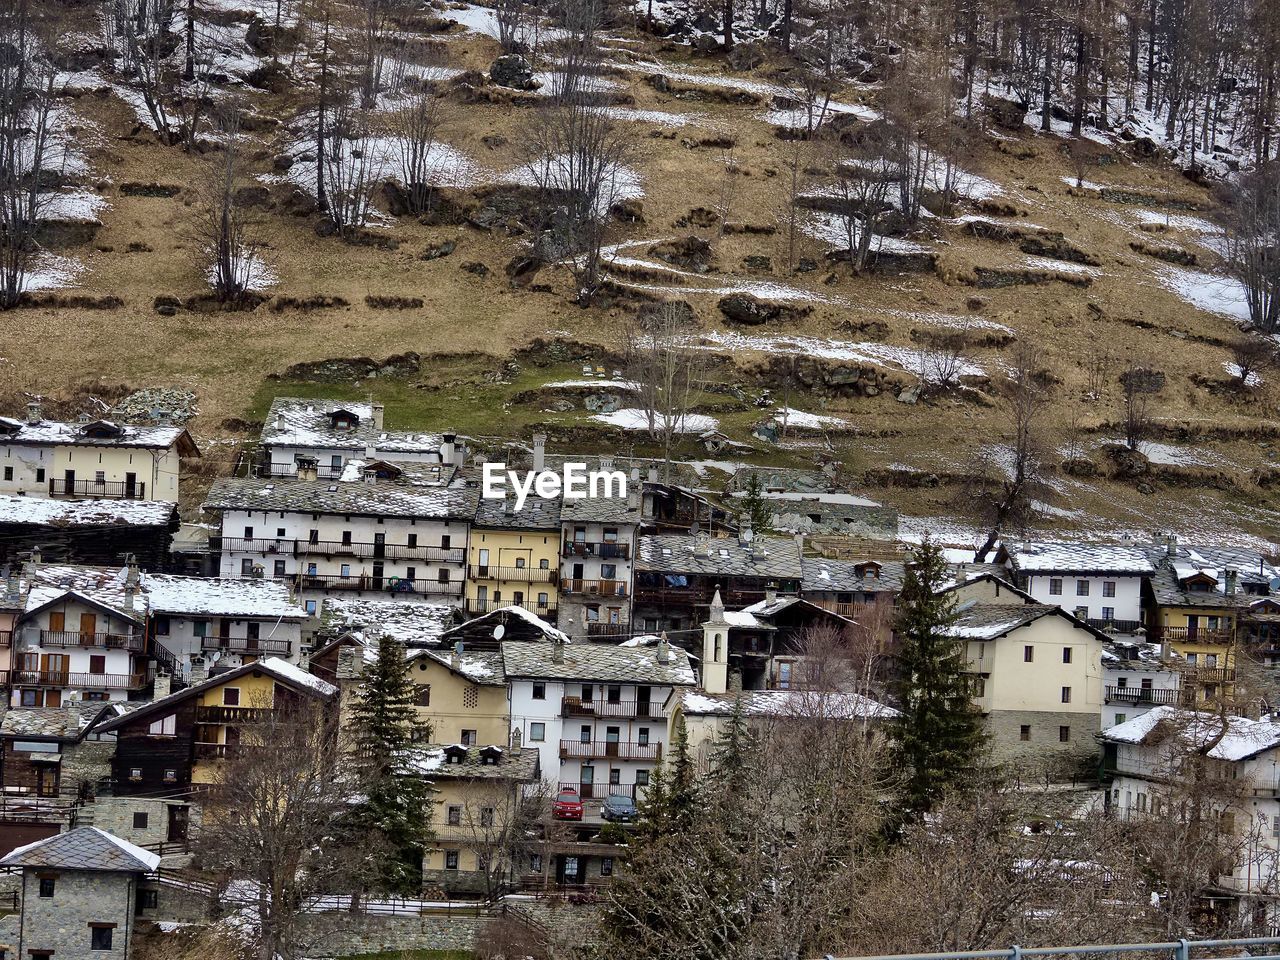 architecture, building exterior, built structure, building, town, high angle view, snow, residential district, aerial photography, no people, city, residential area, house, day, nature, tree, winter, cold temperature, plant, village, outdoors, suburb, roof, land, neighbourhood, mountain, cityscape, urban area, ancient history